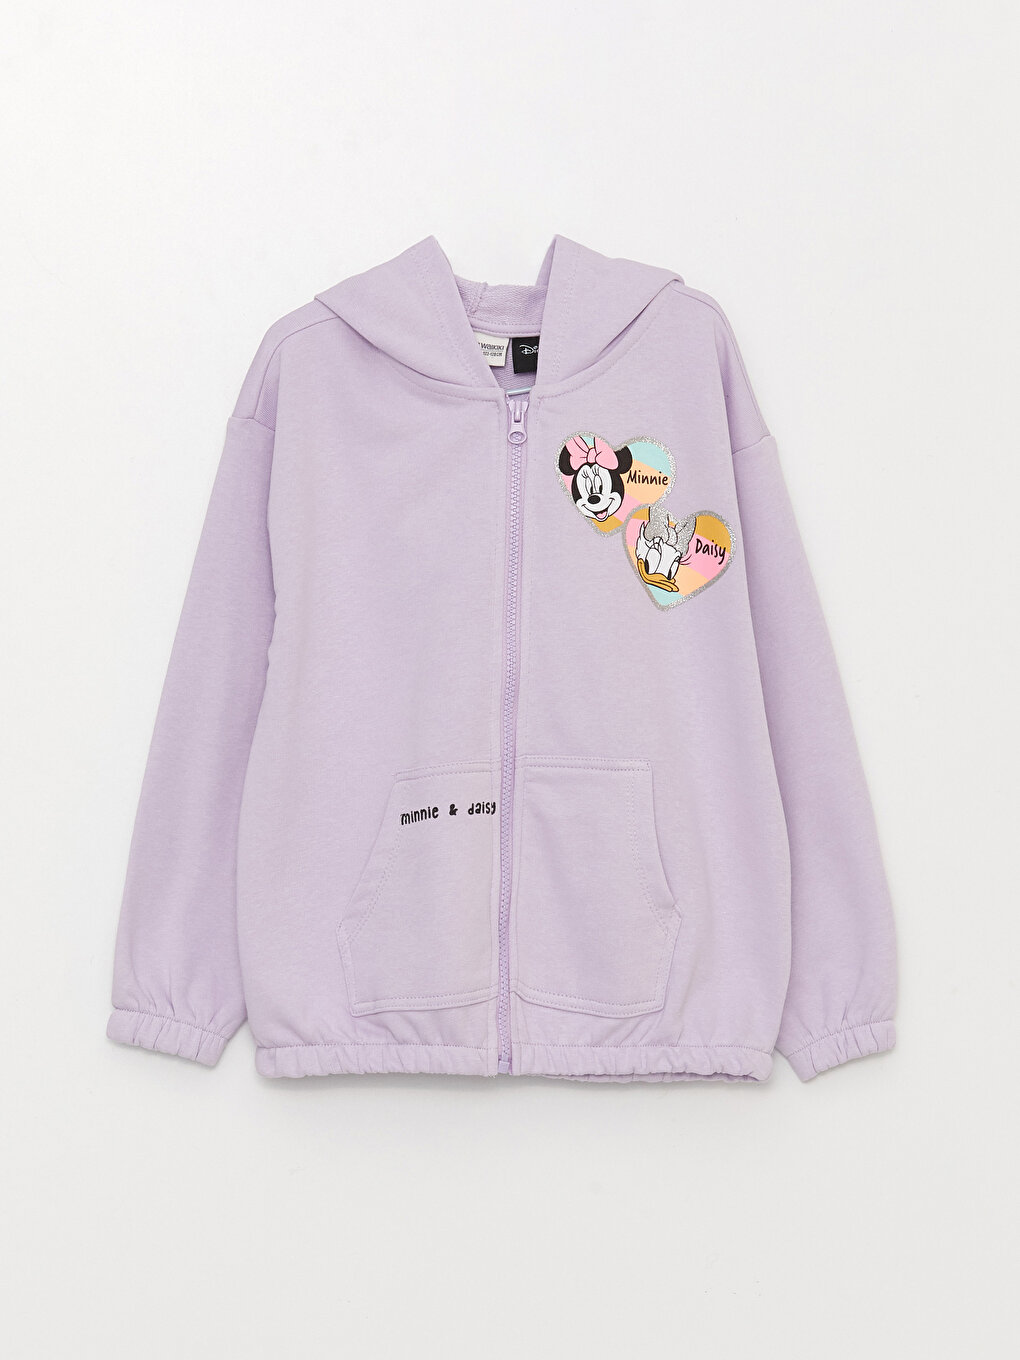 Hoodie Girl Minnie Mouse and Daisy Duck Printed Long Sleeve 